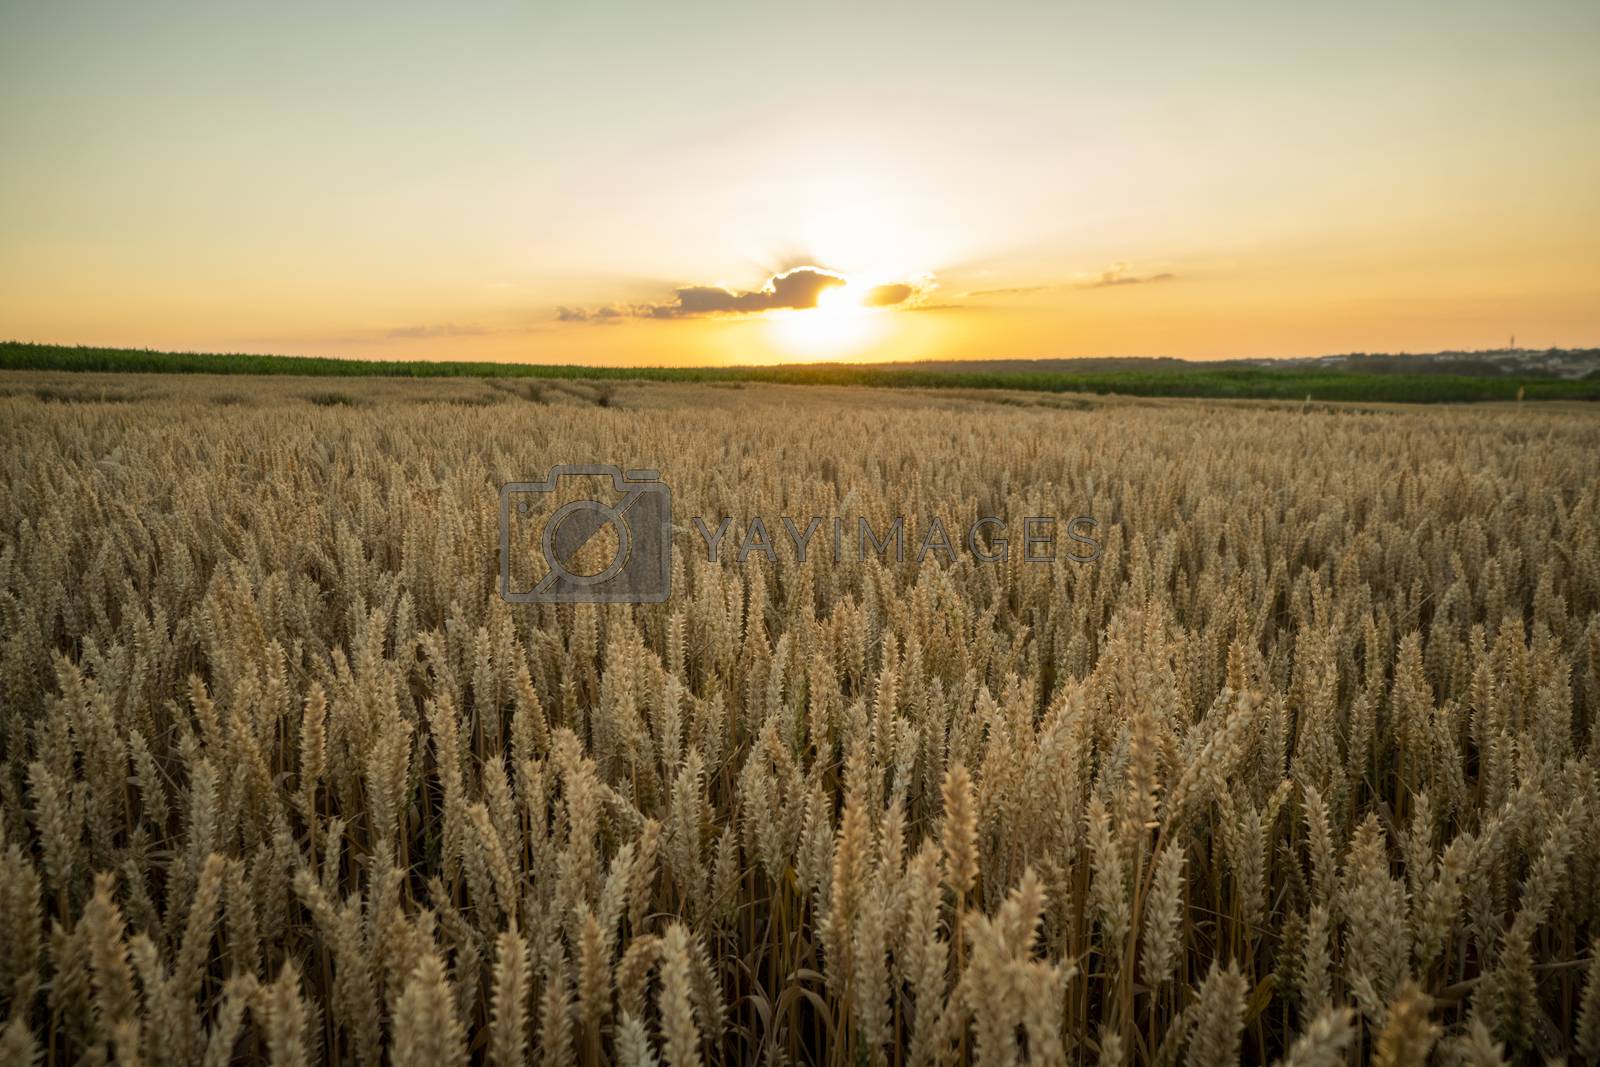 Royalty free image of Wheat field. Golden ears of wheat on the field. Background of ripening ears of meadow wheat field. Rich harvest. Agriculture of natural product. by vovsht